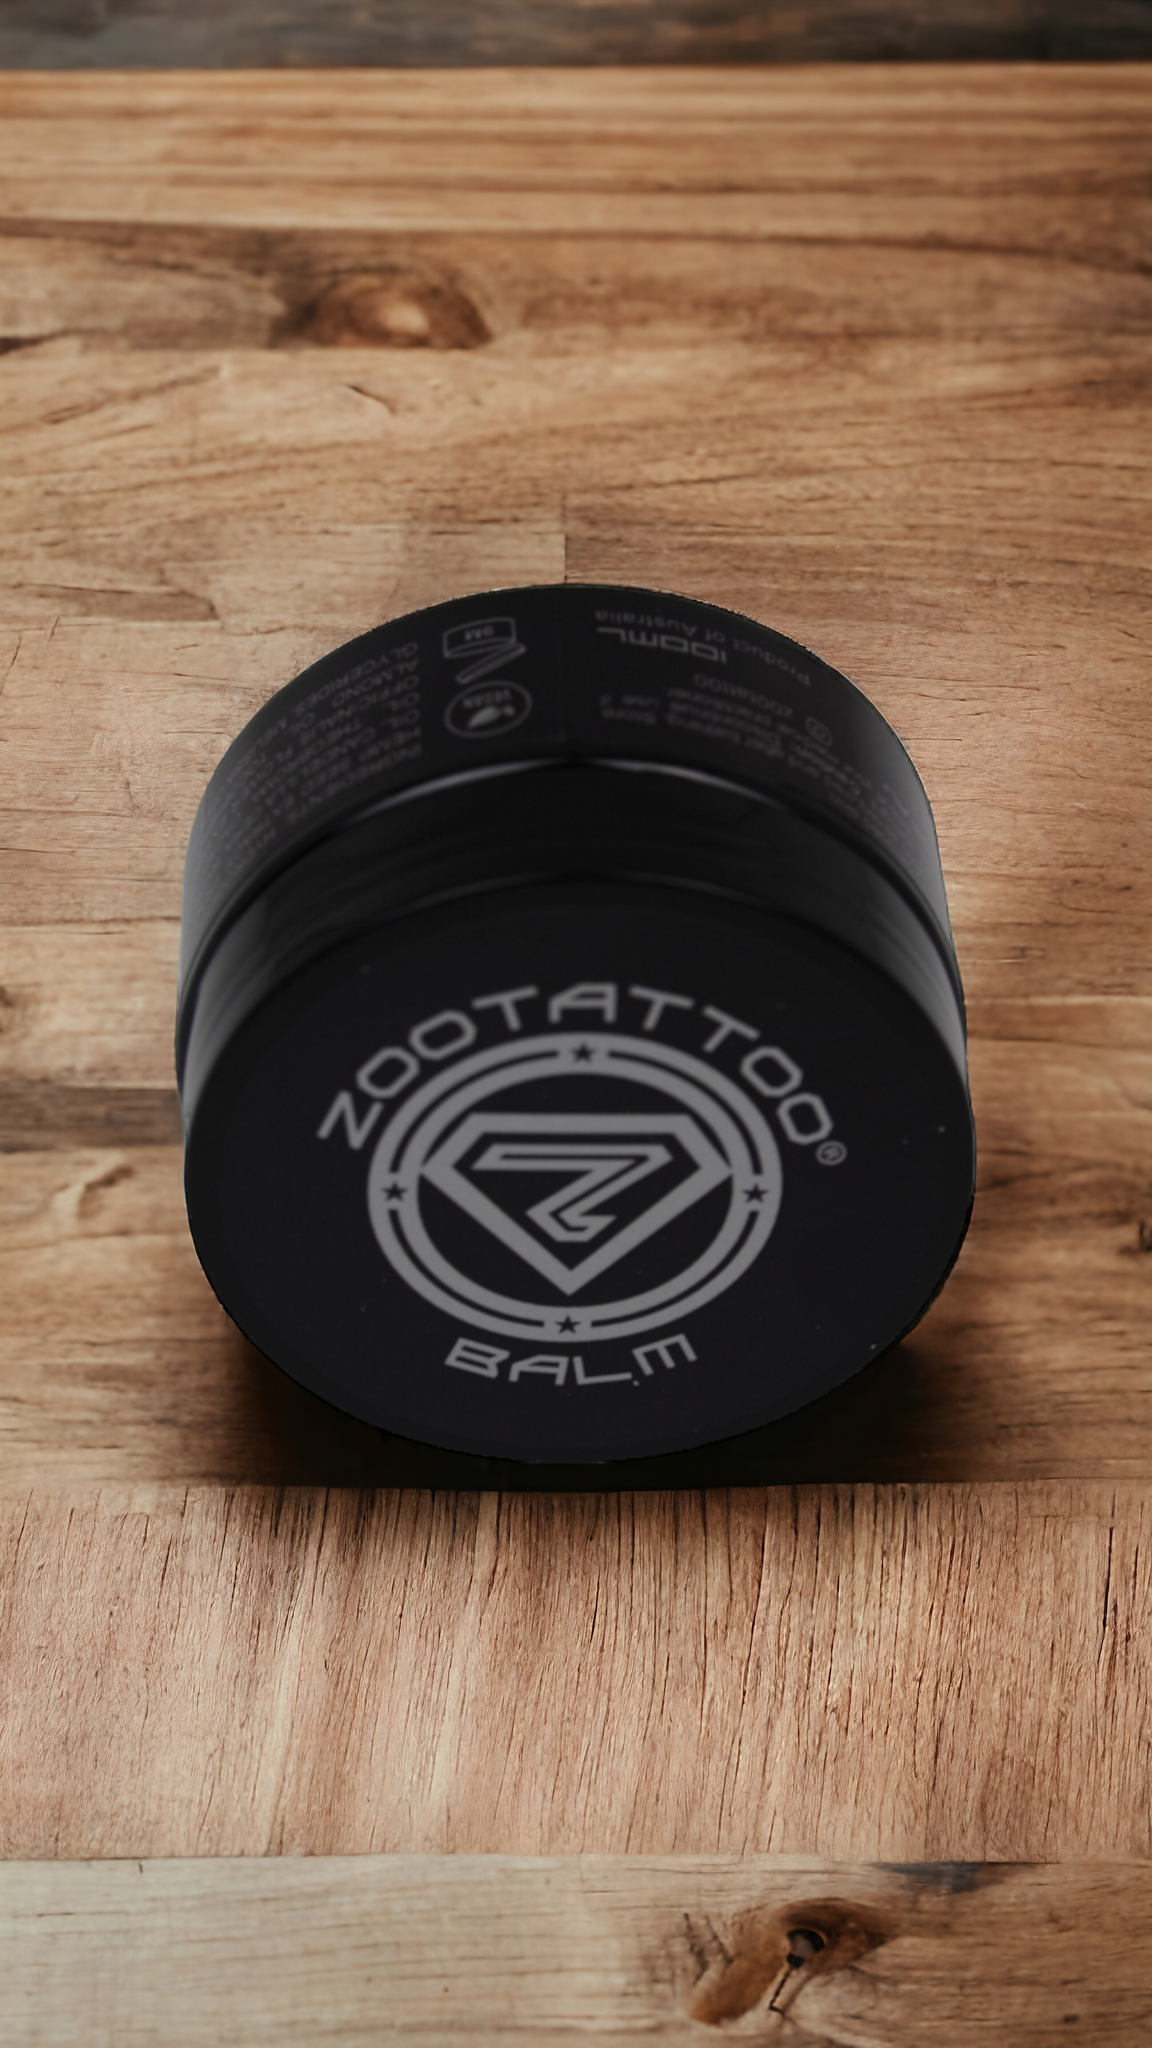 Z Balm - The premium brand when it comes to tattoo aftercare - Tattoo aftercare Australia